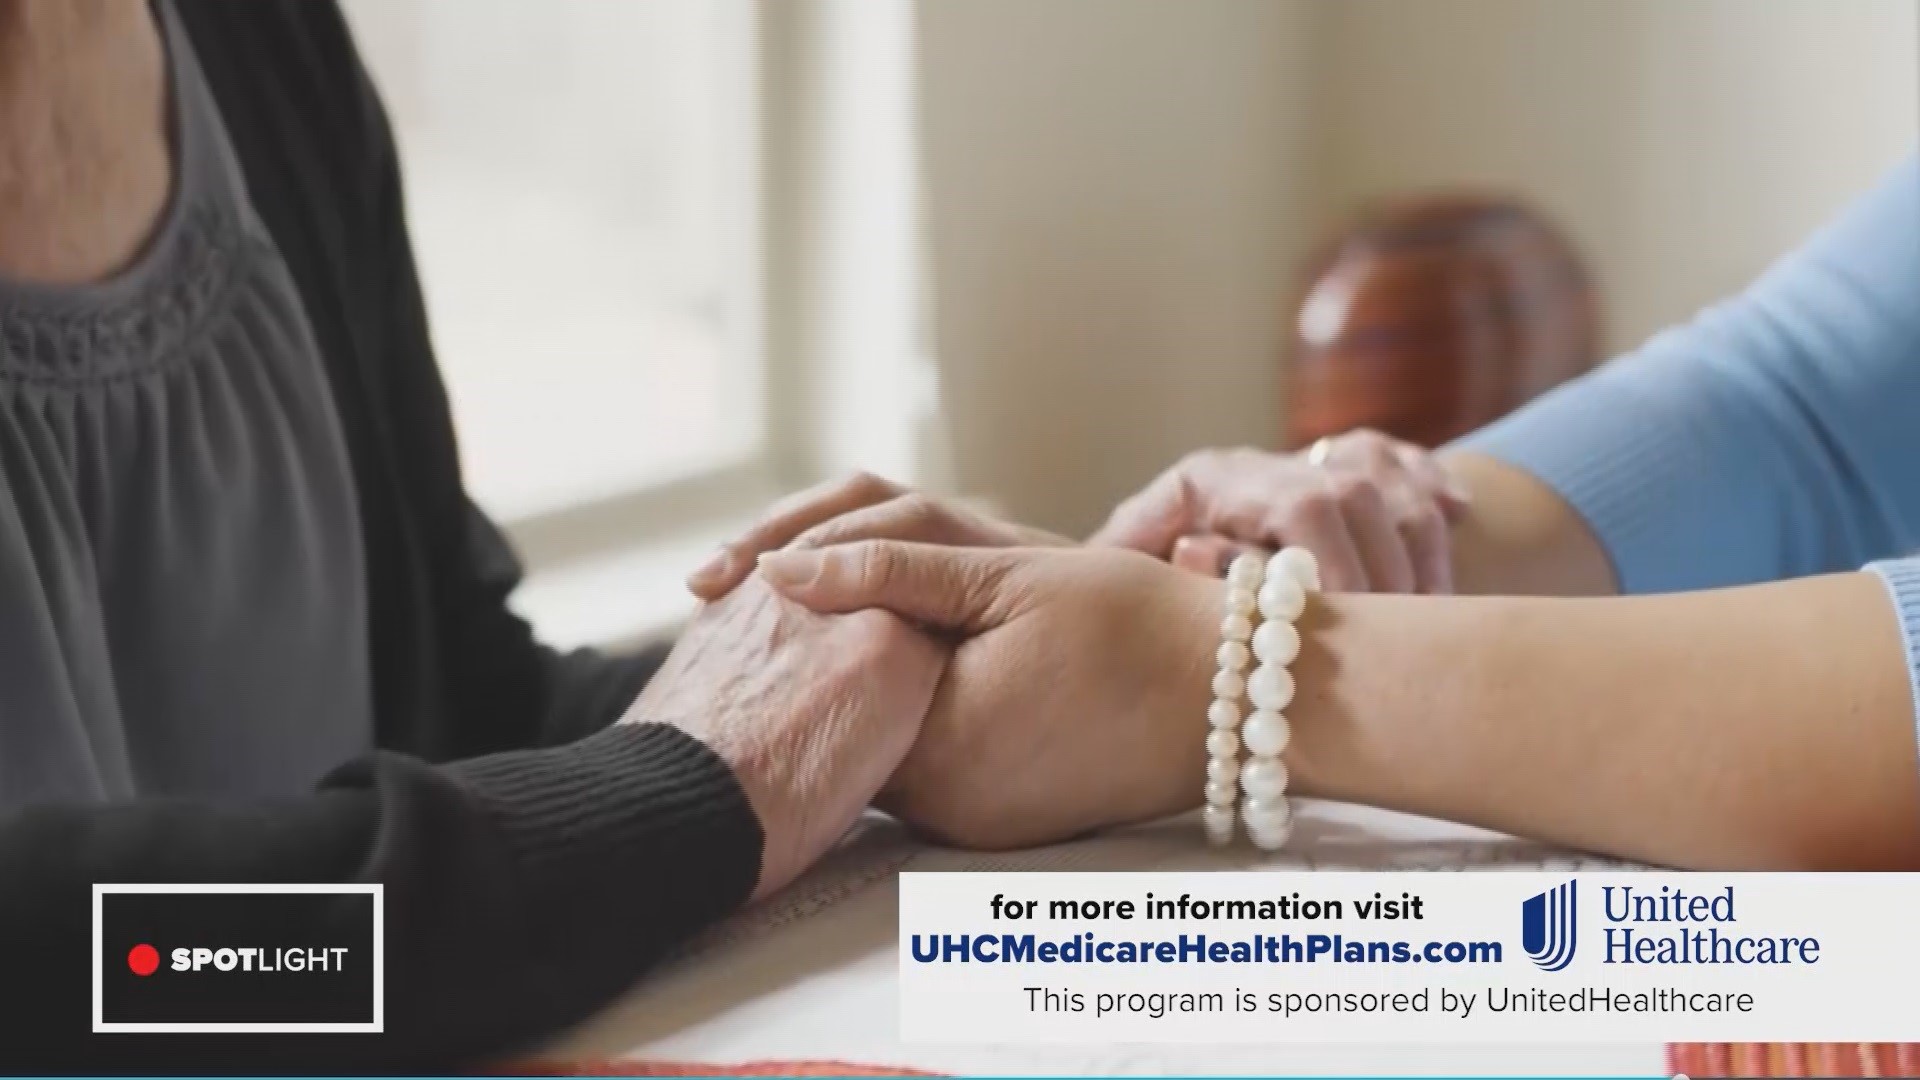 When it comes to Medicare, UnitedHealthcare has you covered. Visit UHCMedicareHealthPlans.com to find out more.